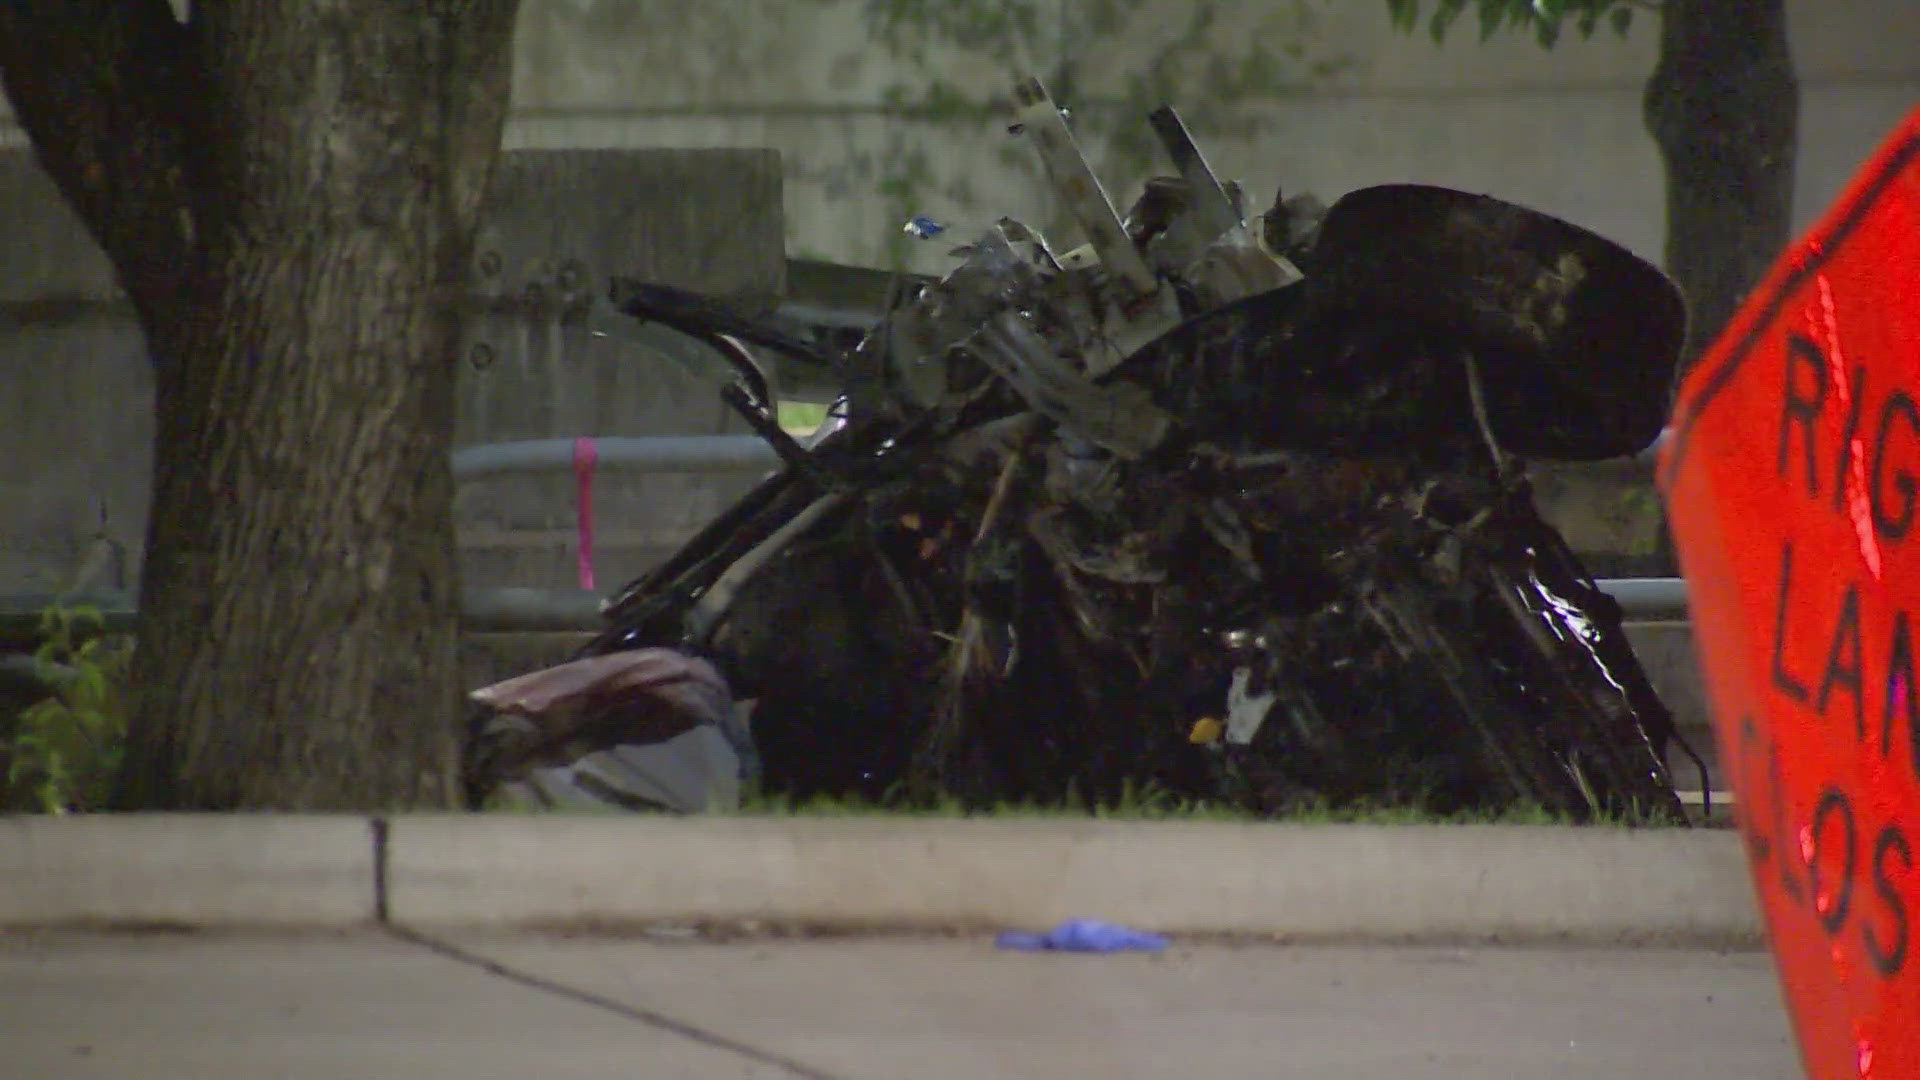 A fatal motorcycle crash was reported in Dallas overnight.